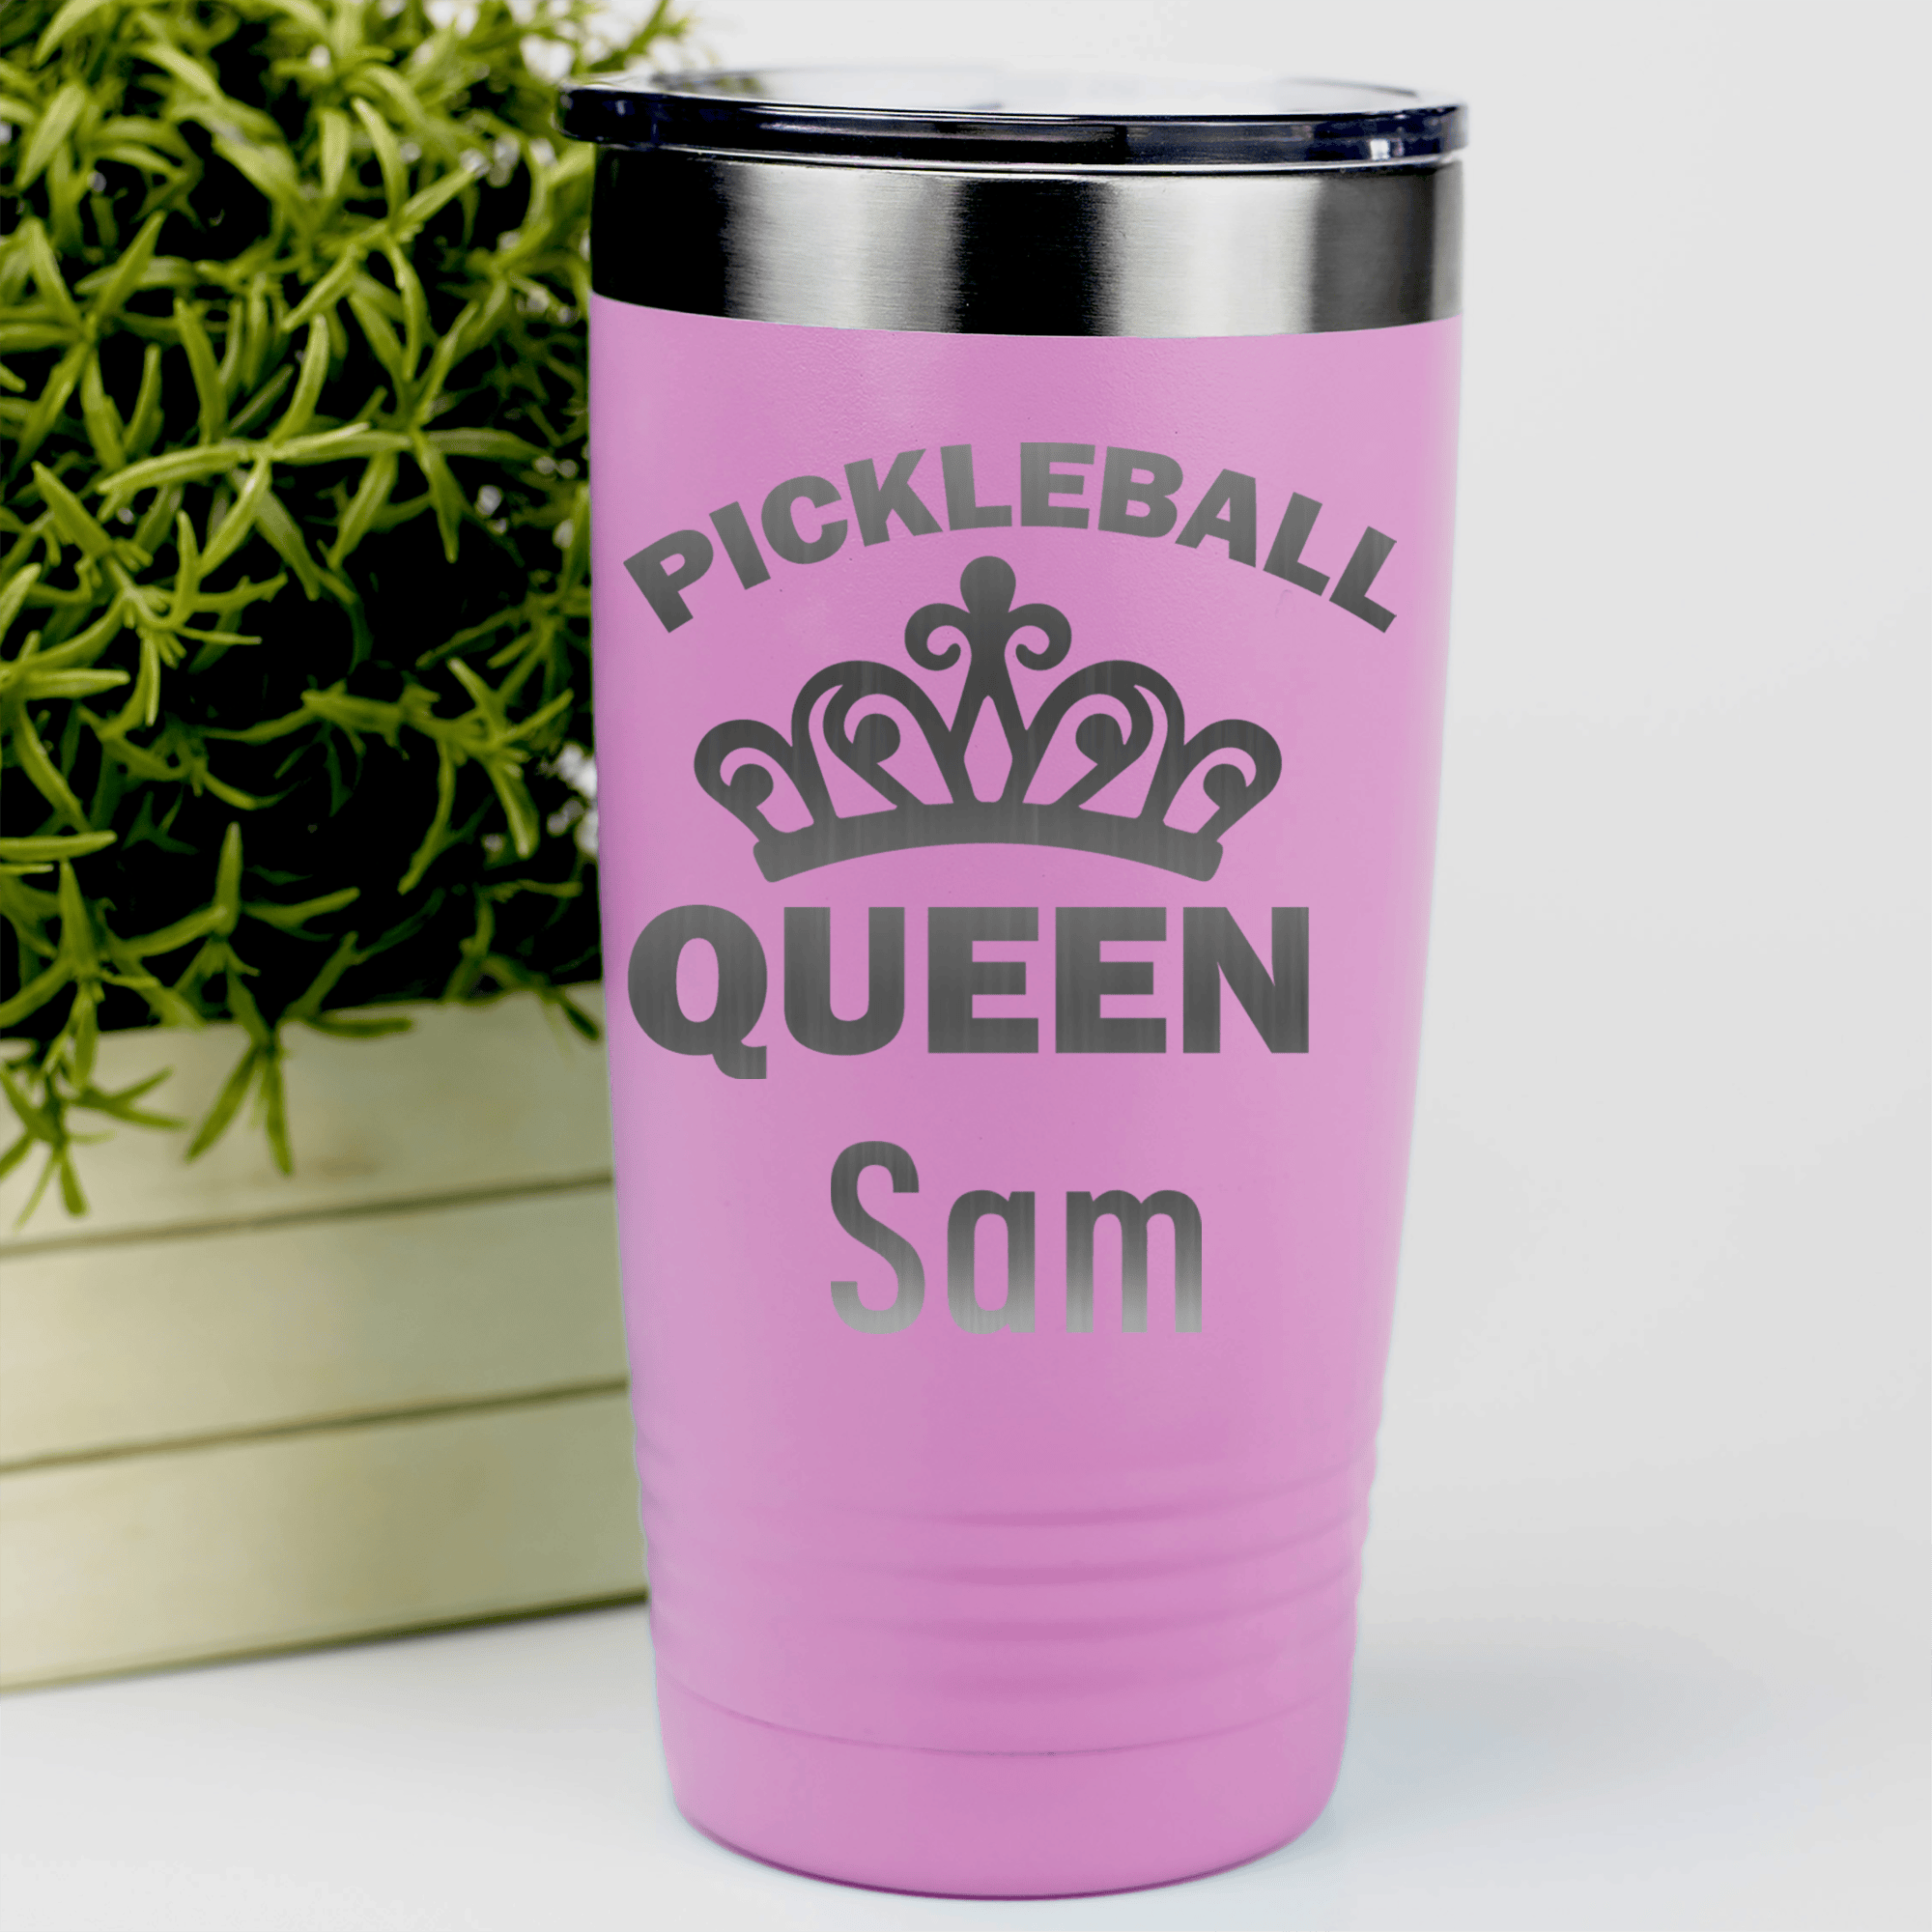 Pink Pickleball Tumbler With The Pickleball Queen Design